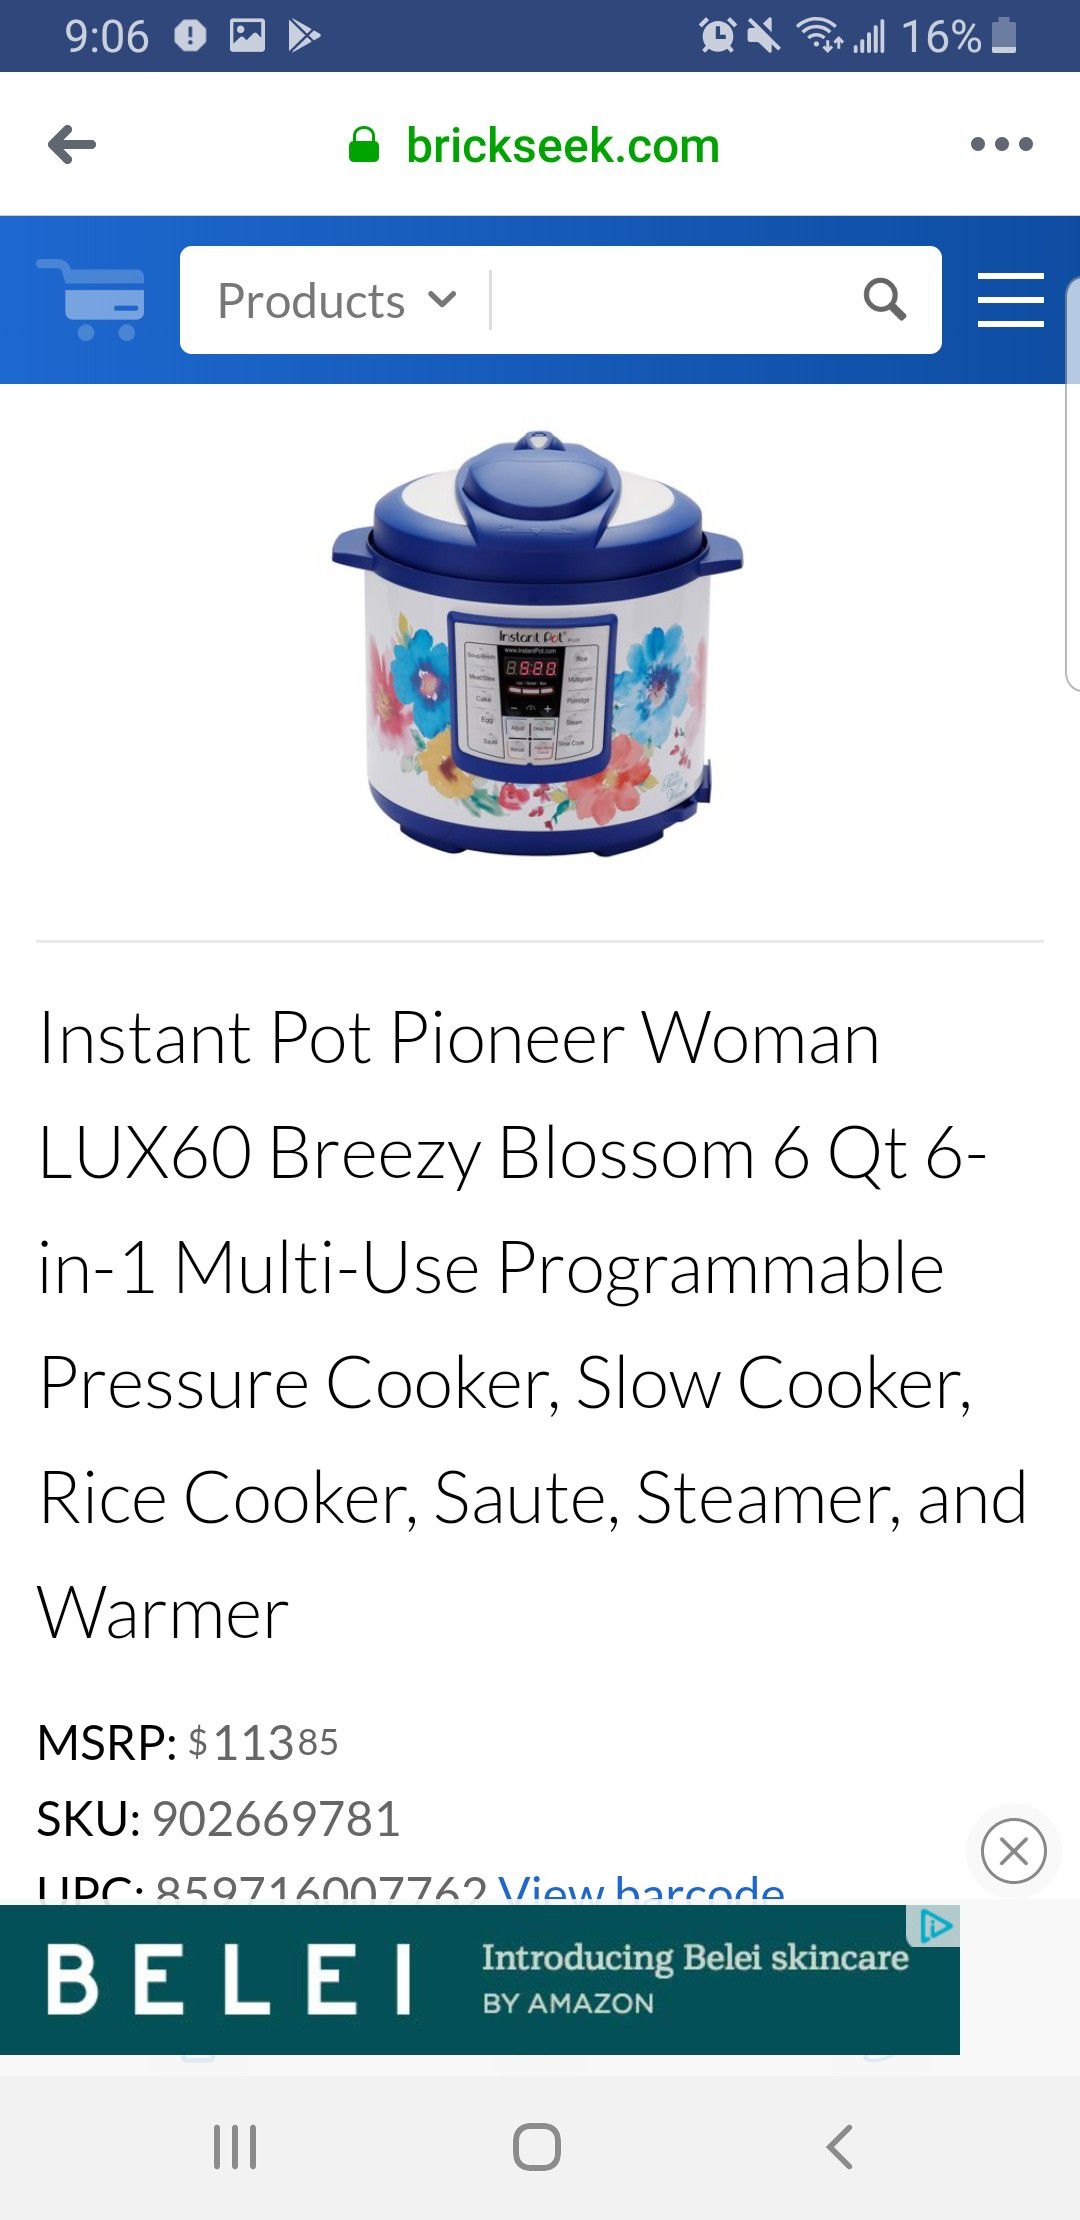 Instant Pot Pioneer Woman LUX60 Breezy Blossom 6 Qt 6-in-1 Multi-Use  Programmable Pressure Cooker, Slow Cooker, Rice Cooker, Saute, Steamer, and